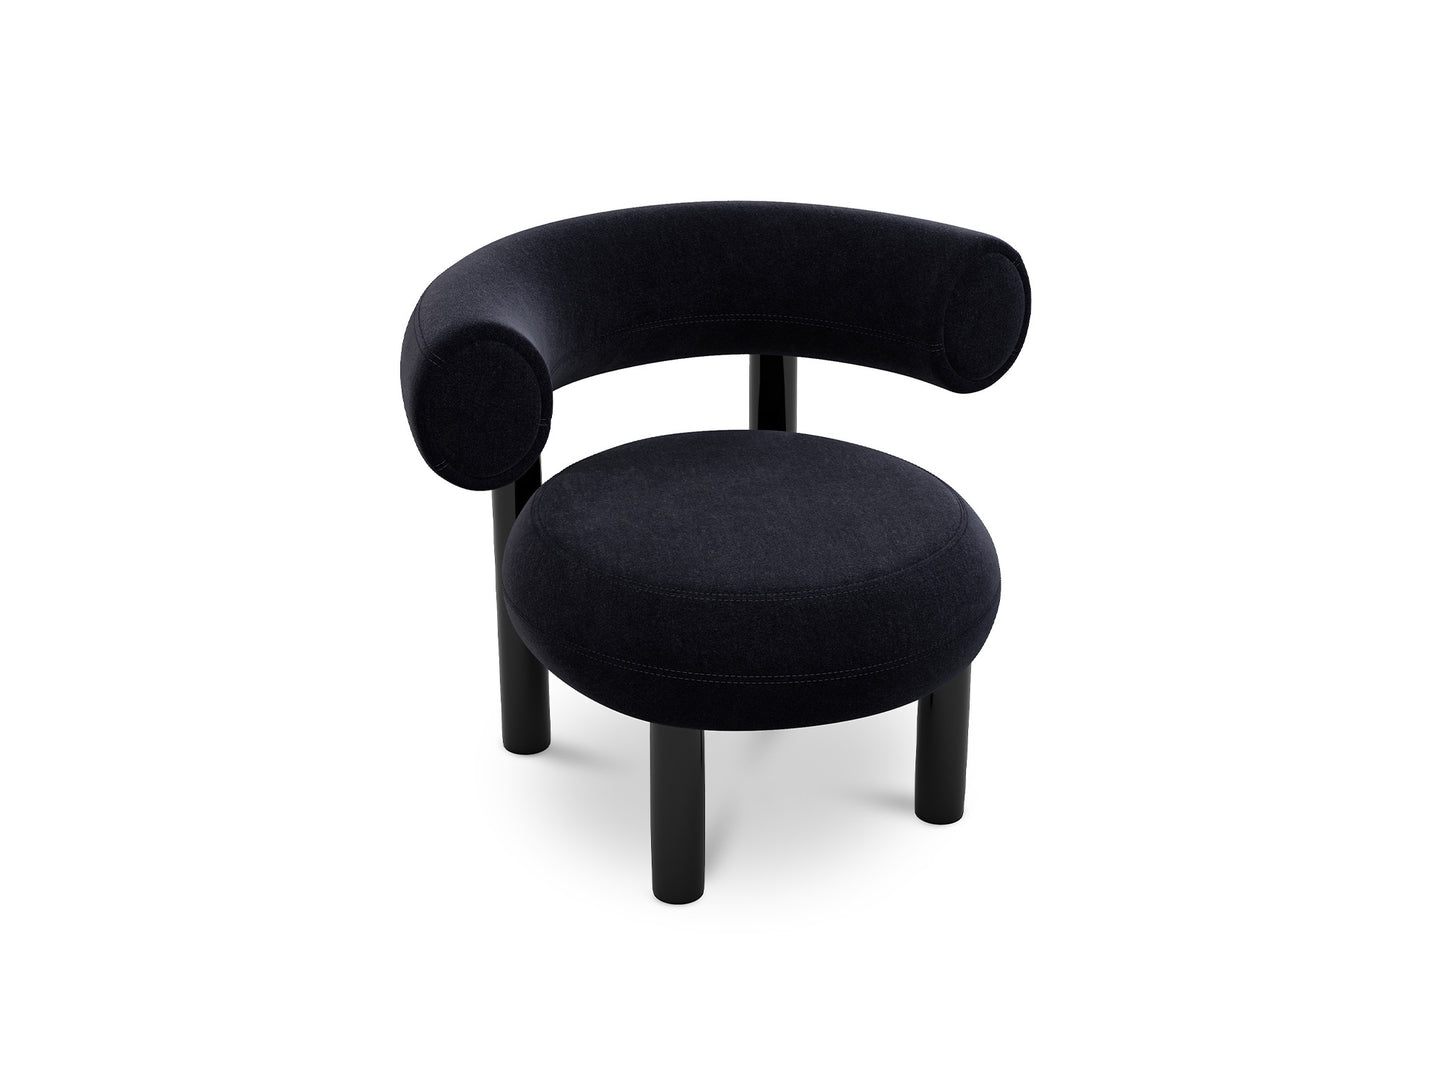 Fat Lounge Chair by Tom Dixon - Gentle 2 183